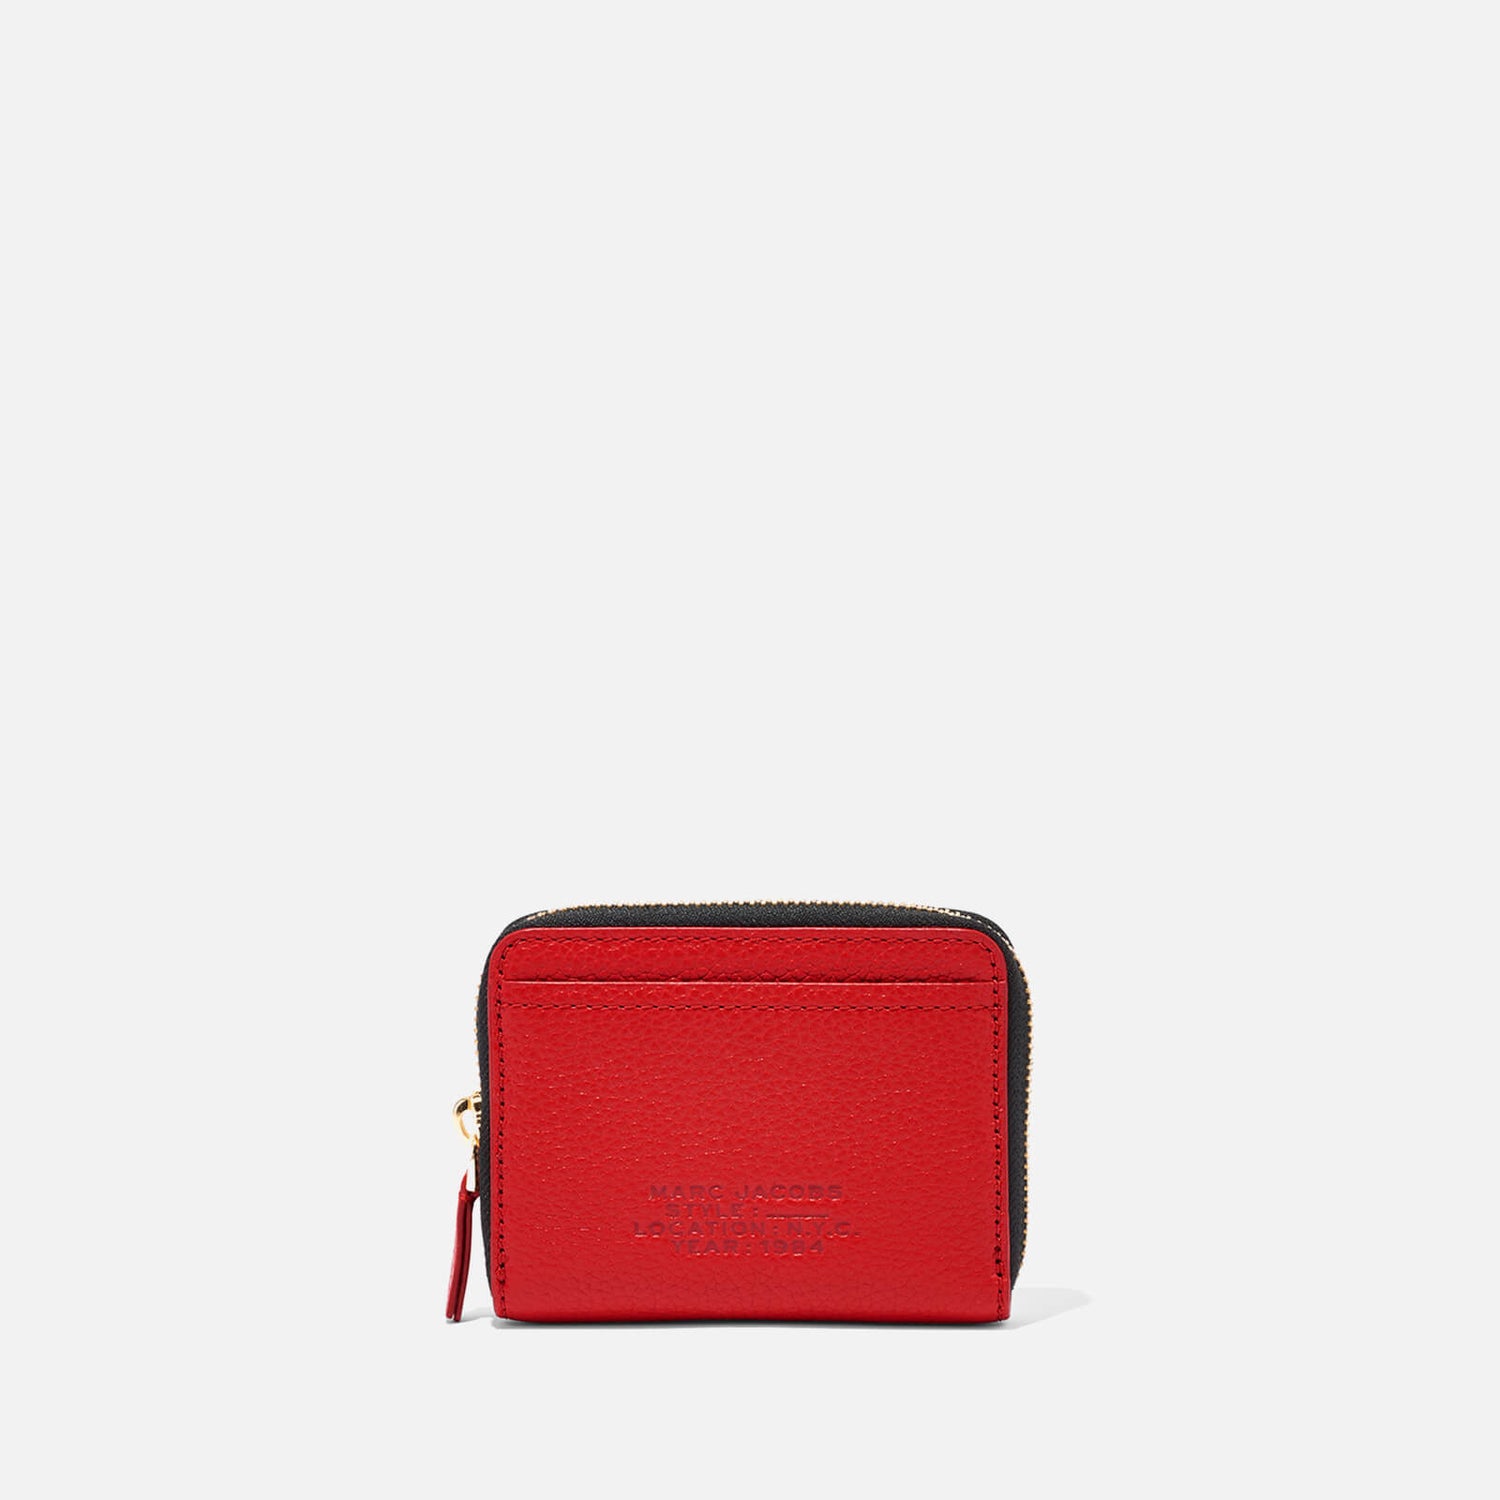 Marc Jacobs The Leather Zip Around Leather Wallet